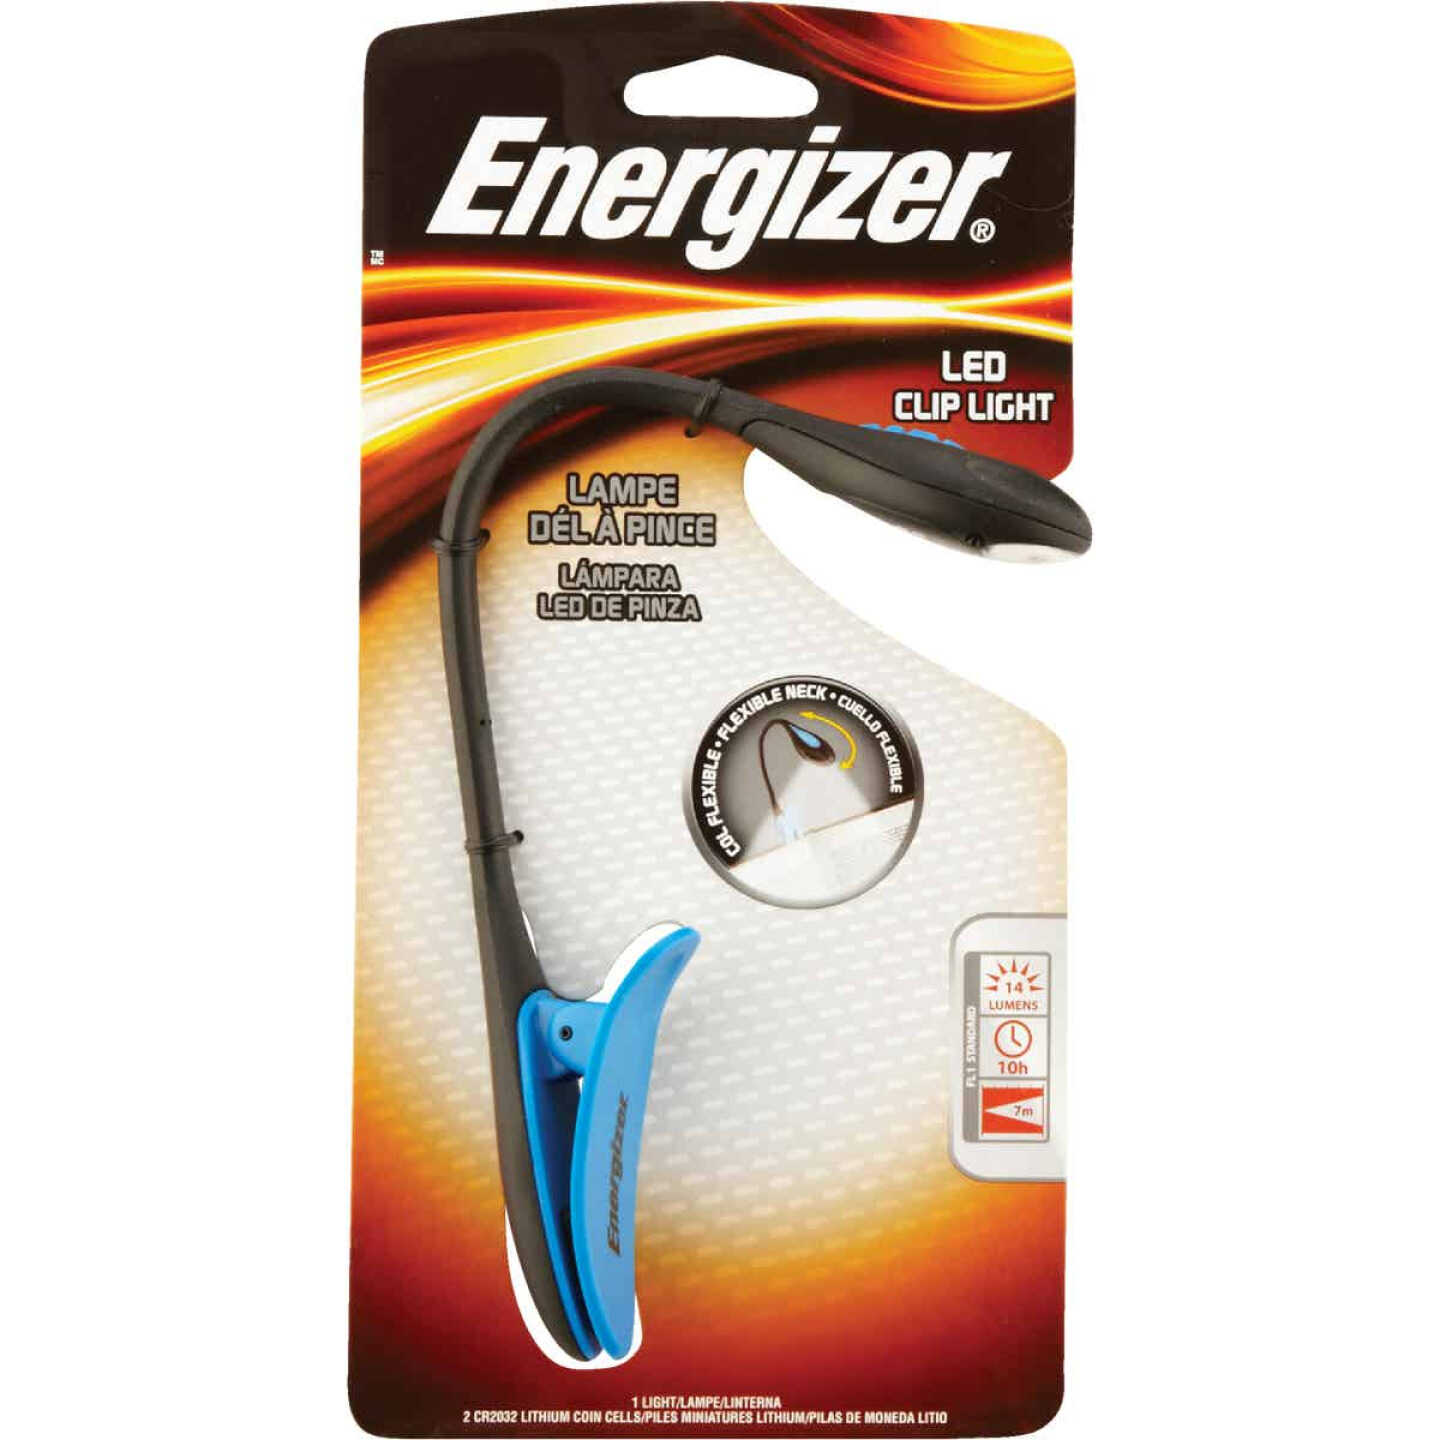 Energizer LED Portable Clip-On Book Light - Jerry's Do it Best Hardware